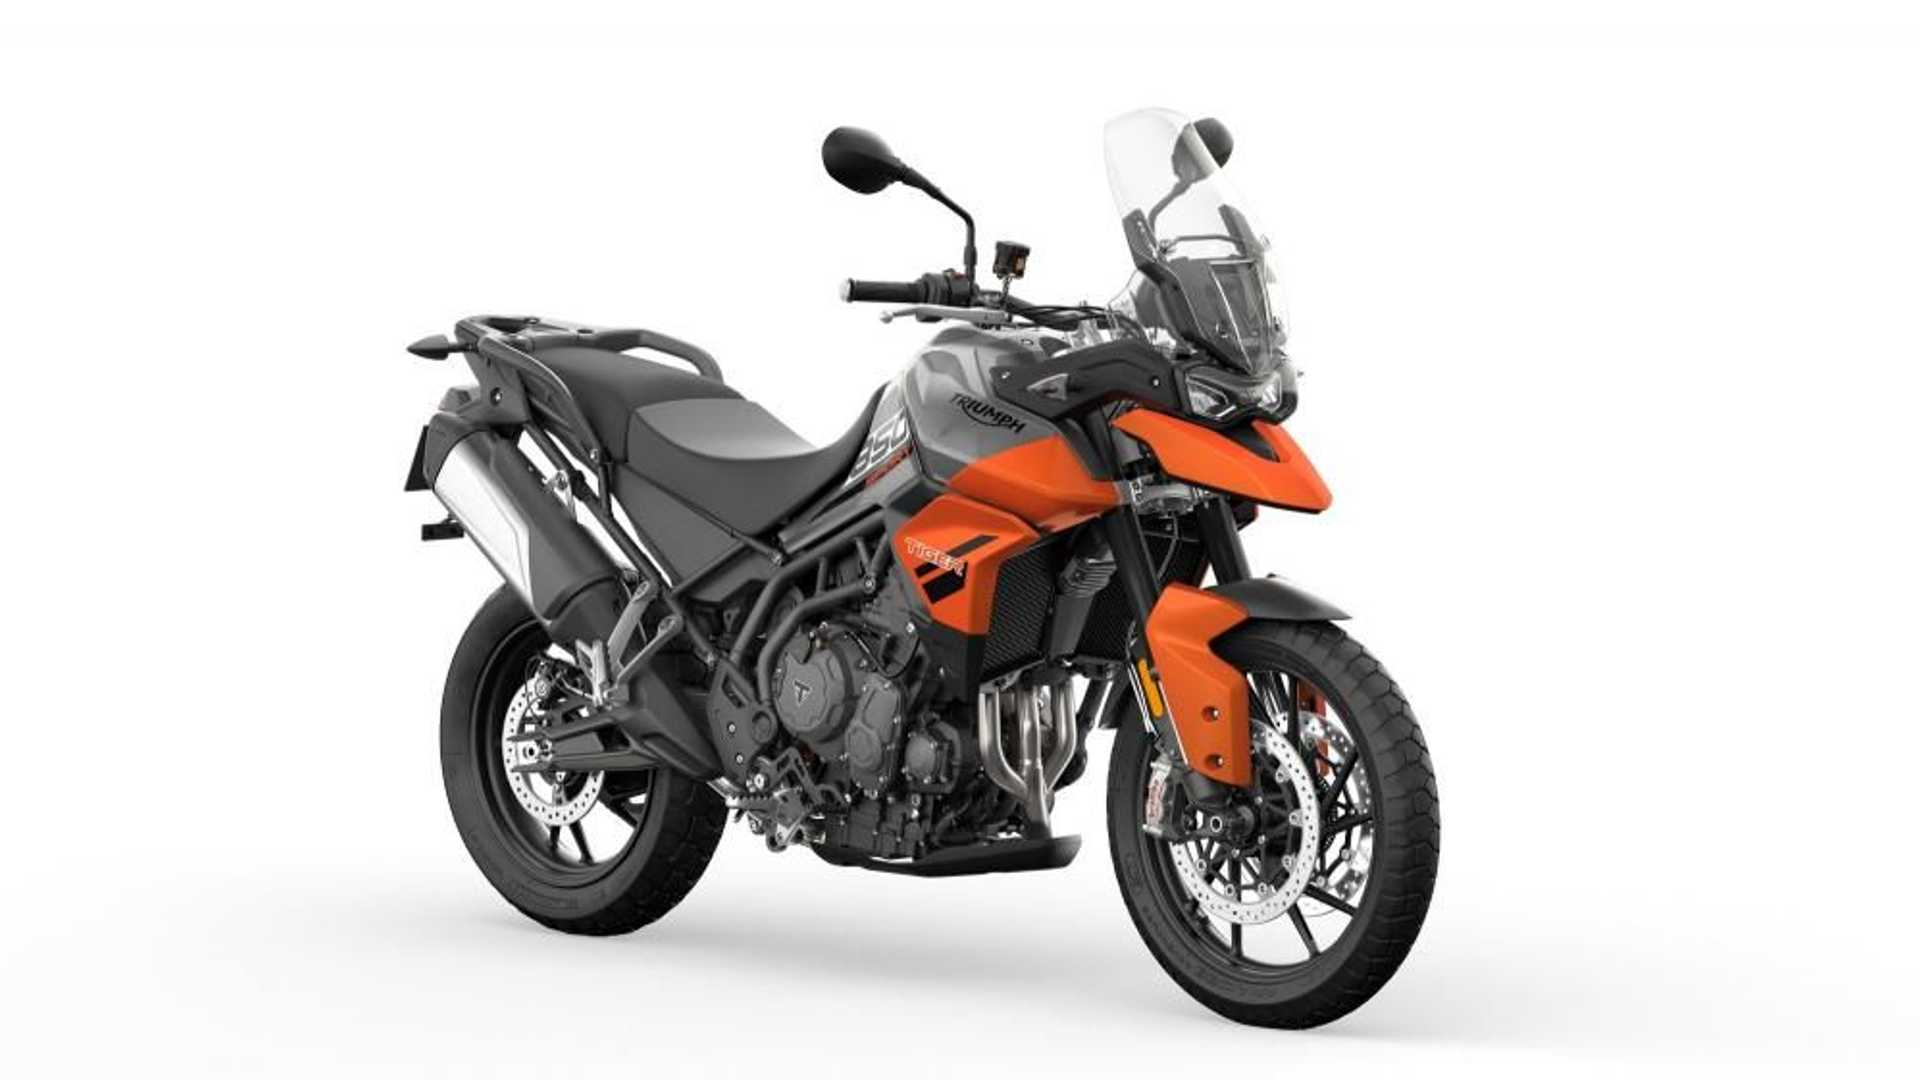 Triumph continues to keep the Tiger line fresh by adding three new color options : Caspian Blue and Matte Graphite, Sandstorm and Graphite , and Baja Orange . These new colors will be available in July 2022. For the 2023 model year, there will be : Anything new or new technology must come together again at the end of the year.  The Tiger series is available in four versions : first the Tiger 660 , then the Tiger 850 Tiger 900 and finally Tiger 1200. Additional colors will be associated with the Tiger 900 on the GT, GT Pro, Rally and Rally trim levels Pro and Tiger 850. . Sports.  Starting with the Tiger 850 Sport , new color options in the lineup are Graphite and Baja Orange . Orange serves as a complement to the gray base color, and Triumph has chosen to paint the beak. side of the front fender and part of the front fairing.  The Tiger 900 GT and GT Pro models take it to the next level. It receives a gorgeous shade of blue that Triumph calls Caspian Blue . The color is painted over almost all of the Tiger 's body panels.  The final color option is for the off-road-focused Tiger 900 Rally and Rally Pro . Called Sandstorm , this color has a texture similar to khaki. but mainly beige Decorated with black , white and silver on the tank and fairing of the bike. The tank and beak are sand colored.